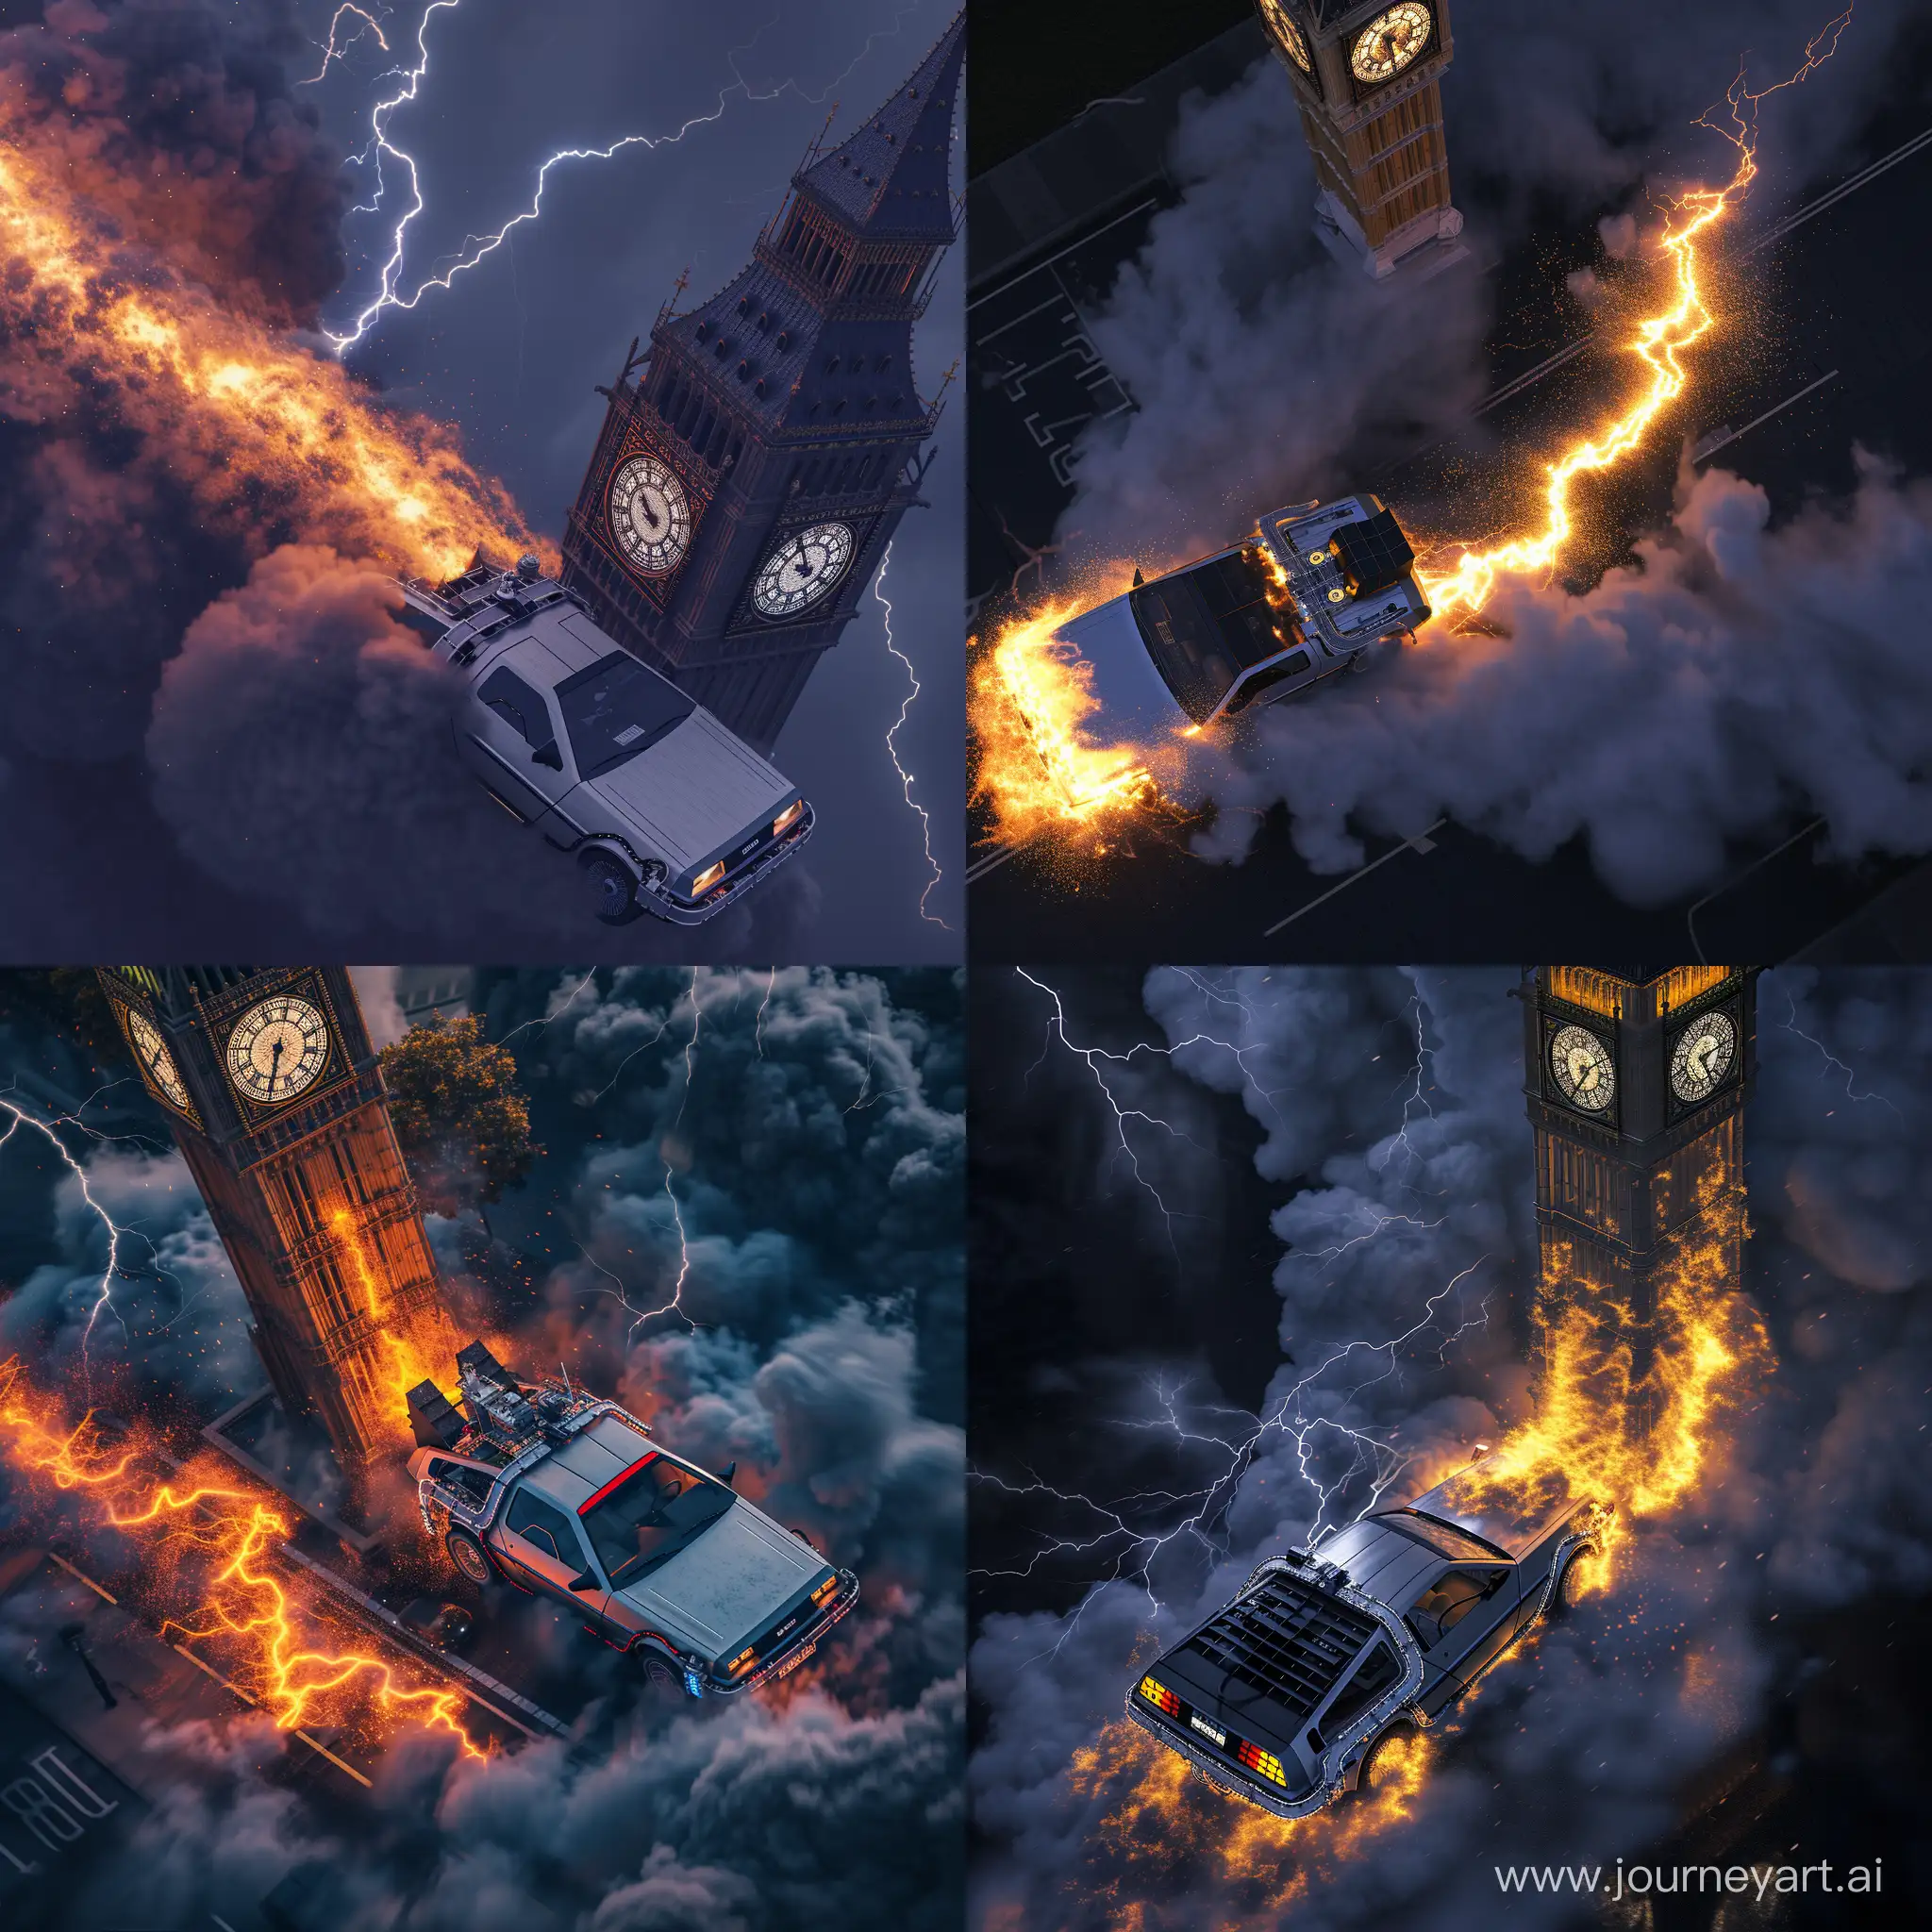 DeLorean-Time-Machine-Vanishing-in-Fiery-Trail-with-Clock-Tower-in-Aerial-Shot